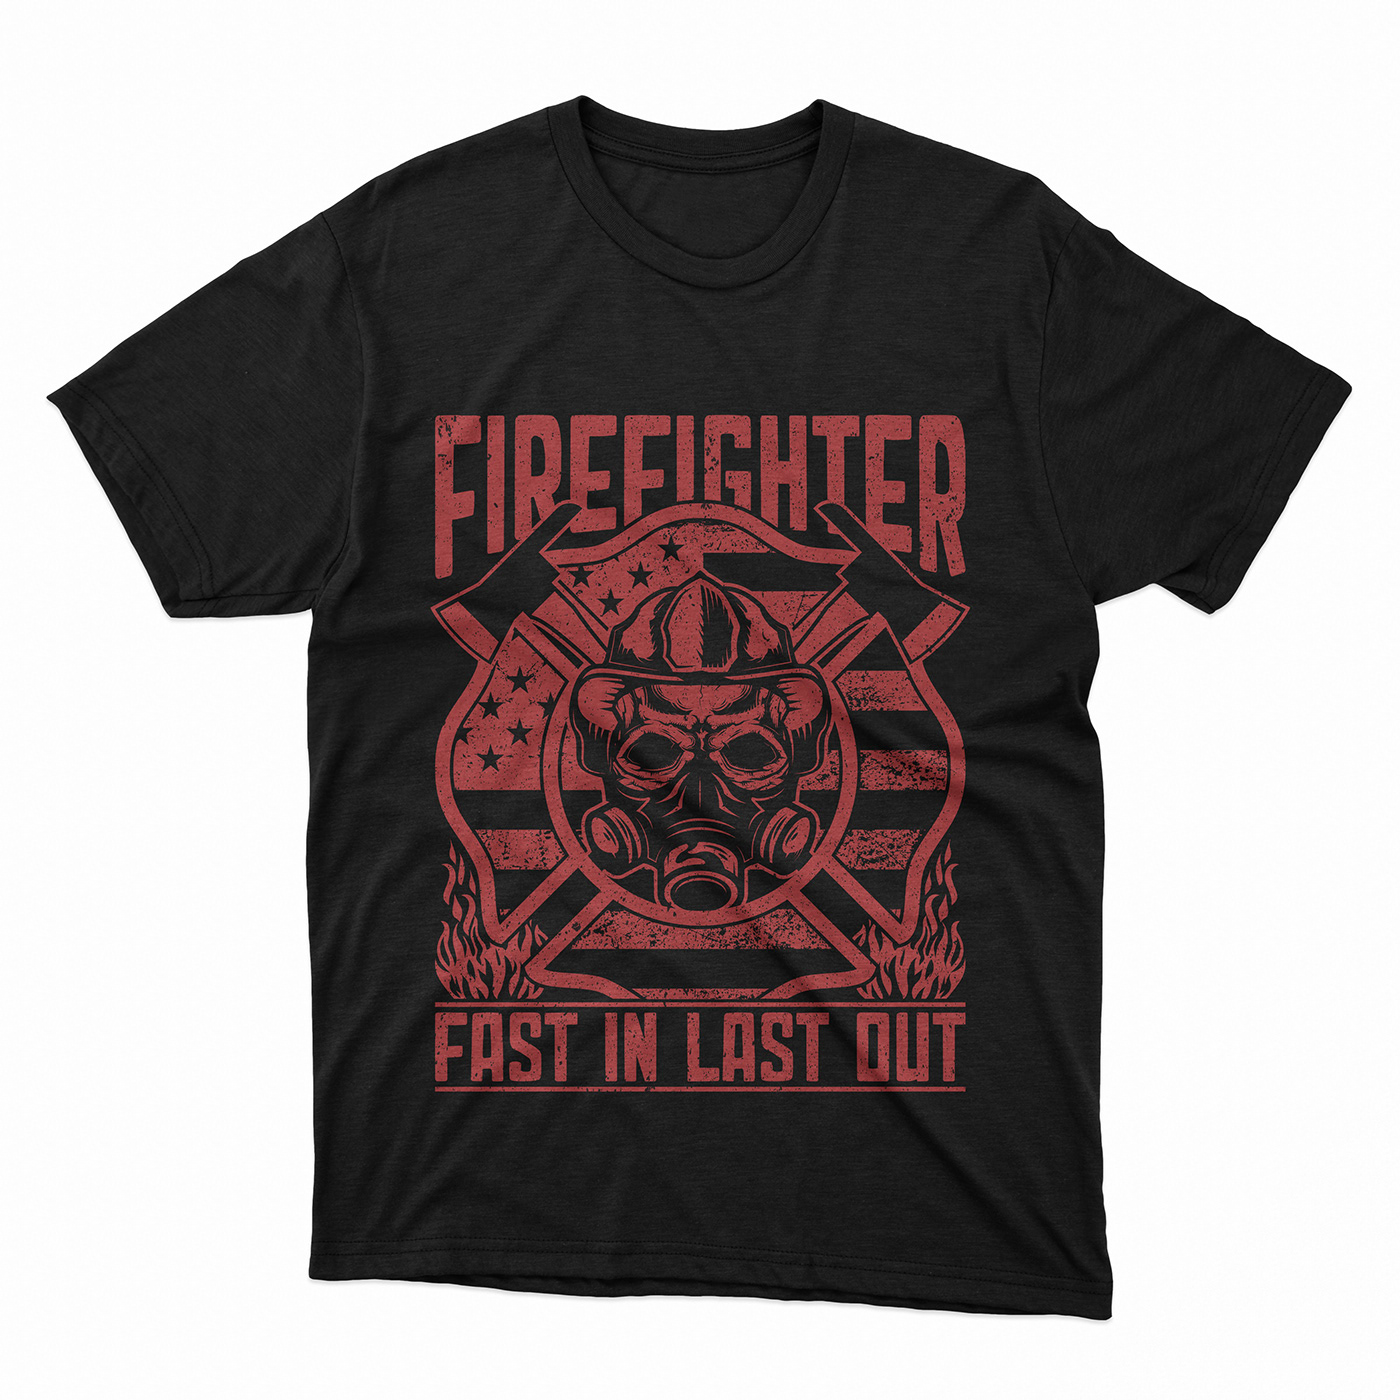 FIREFIGHTER FAST IN LAST OUT